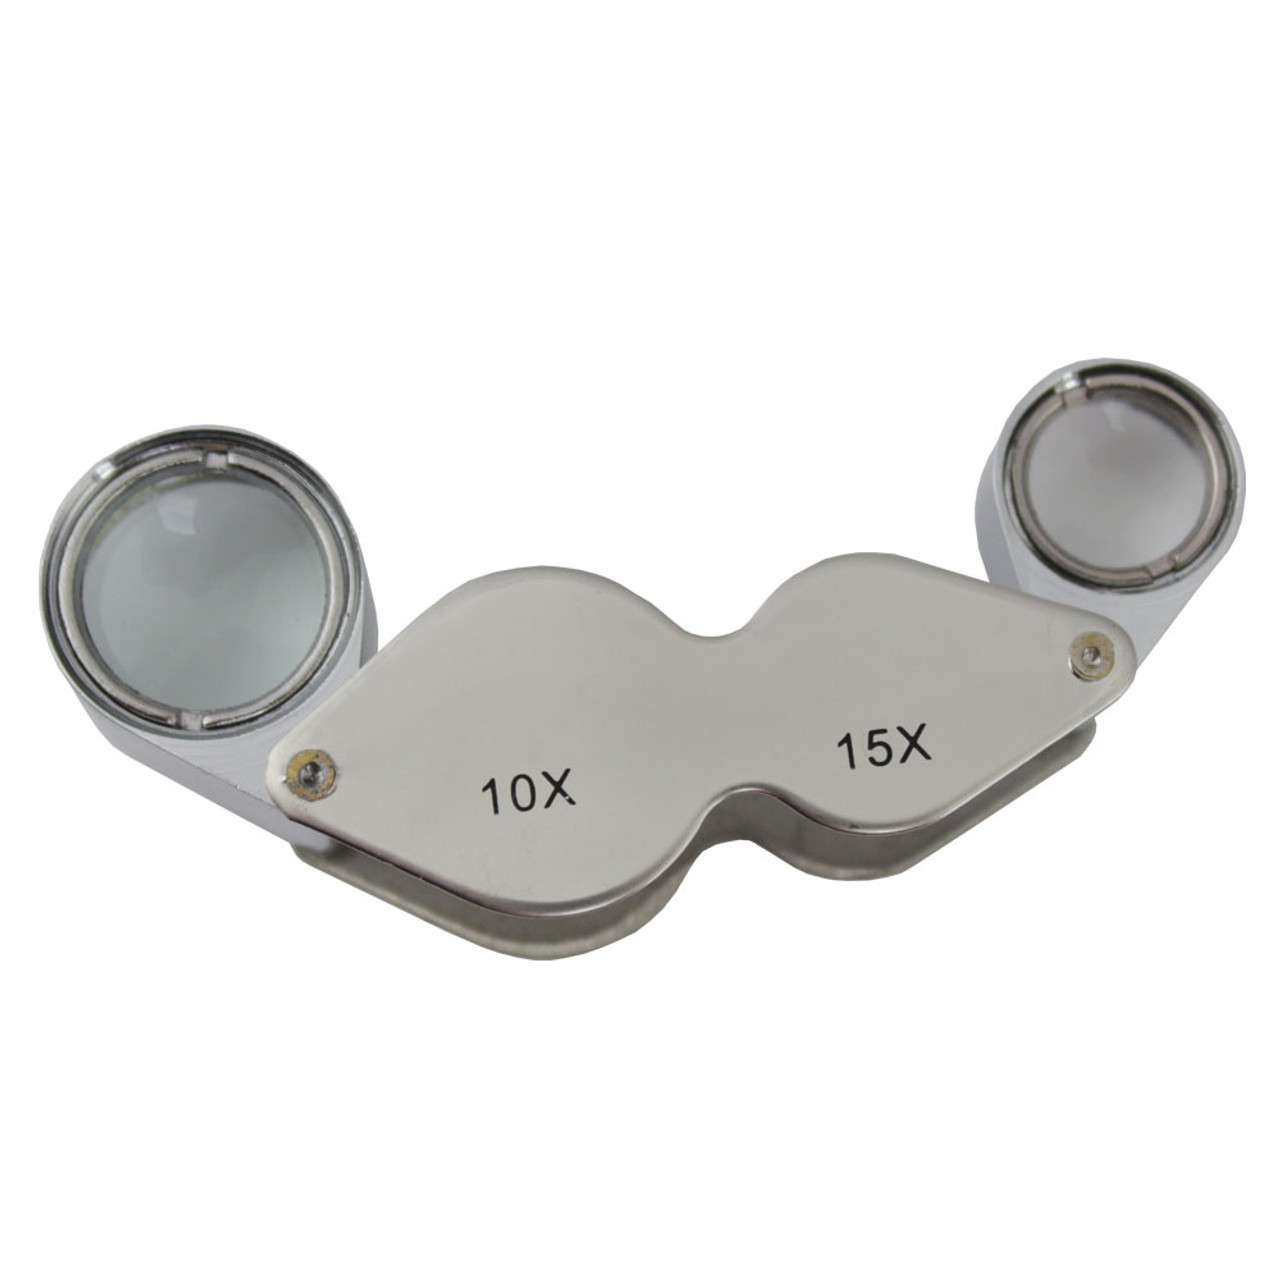 Magnifier Loupe with Headband for Watchmaking and Jewelry | Esslinger